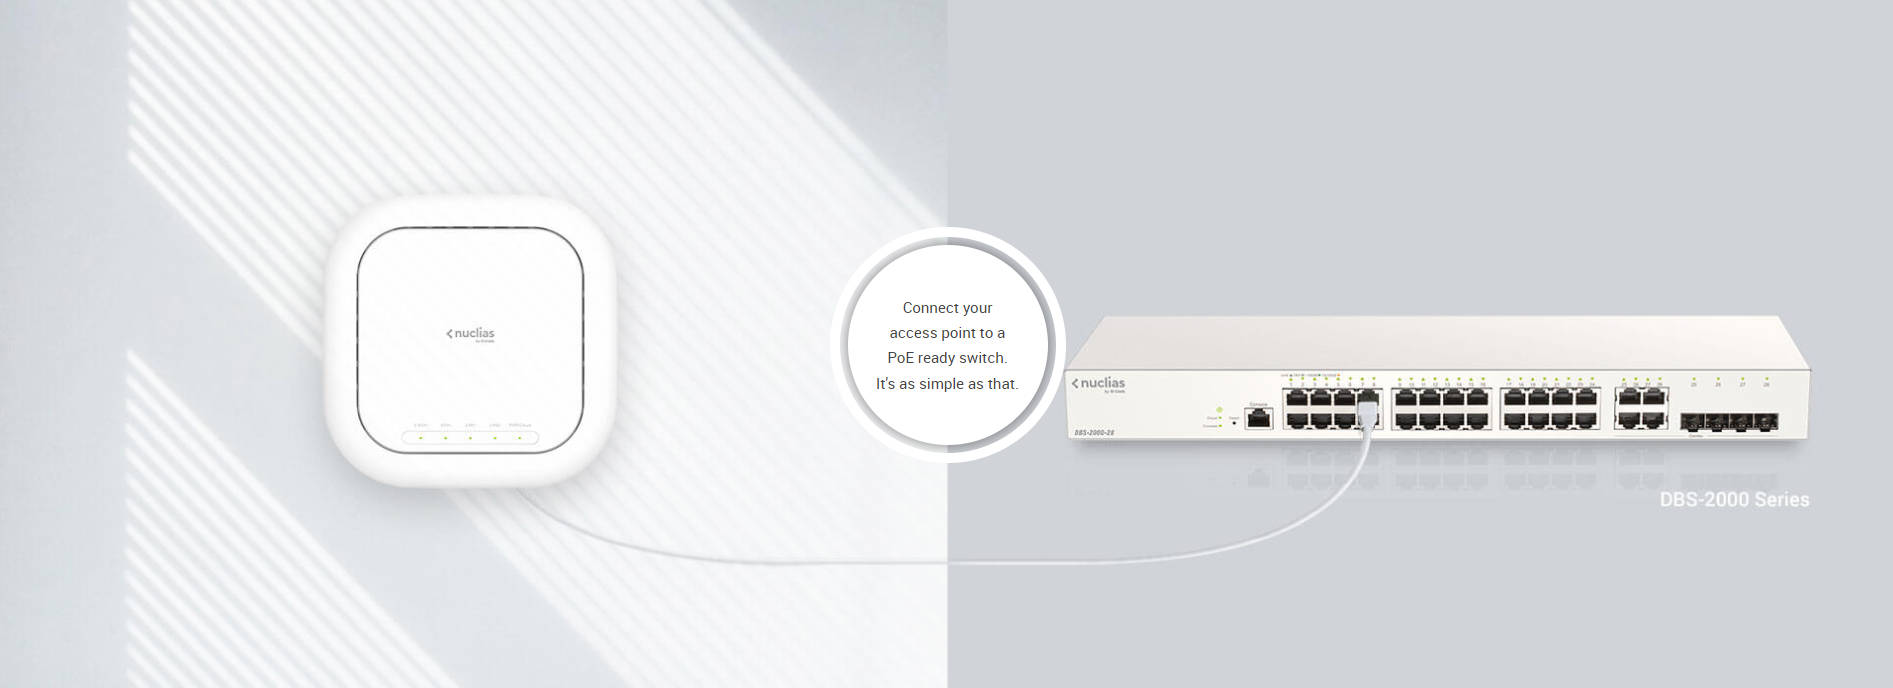 Connect your access point to a PoE ready switch.